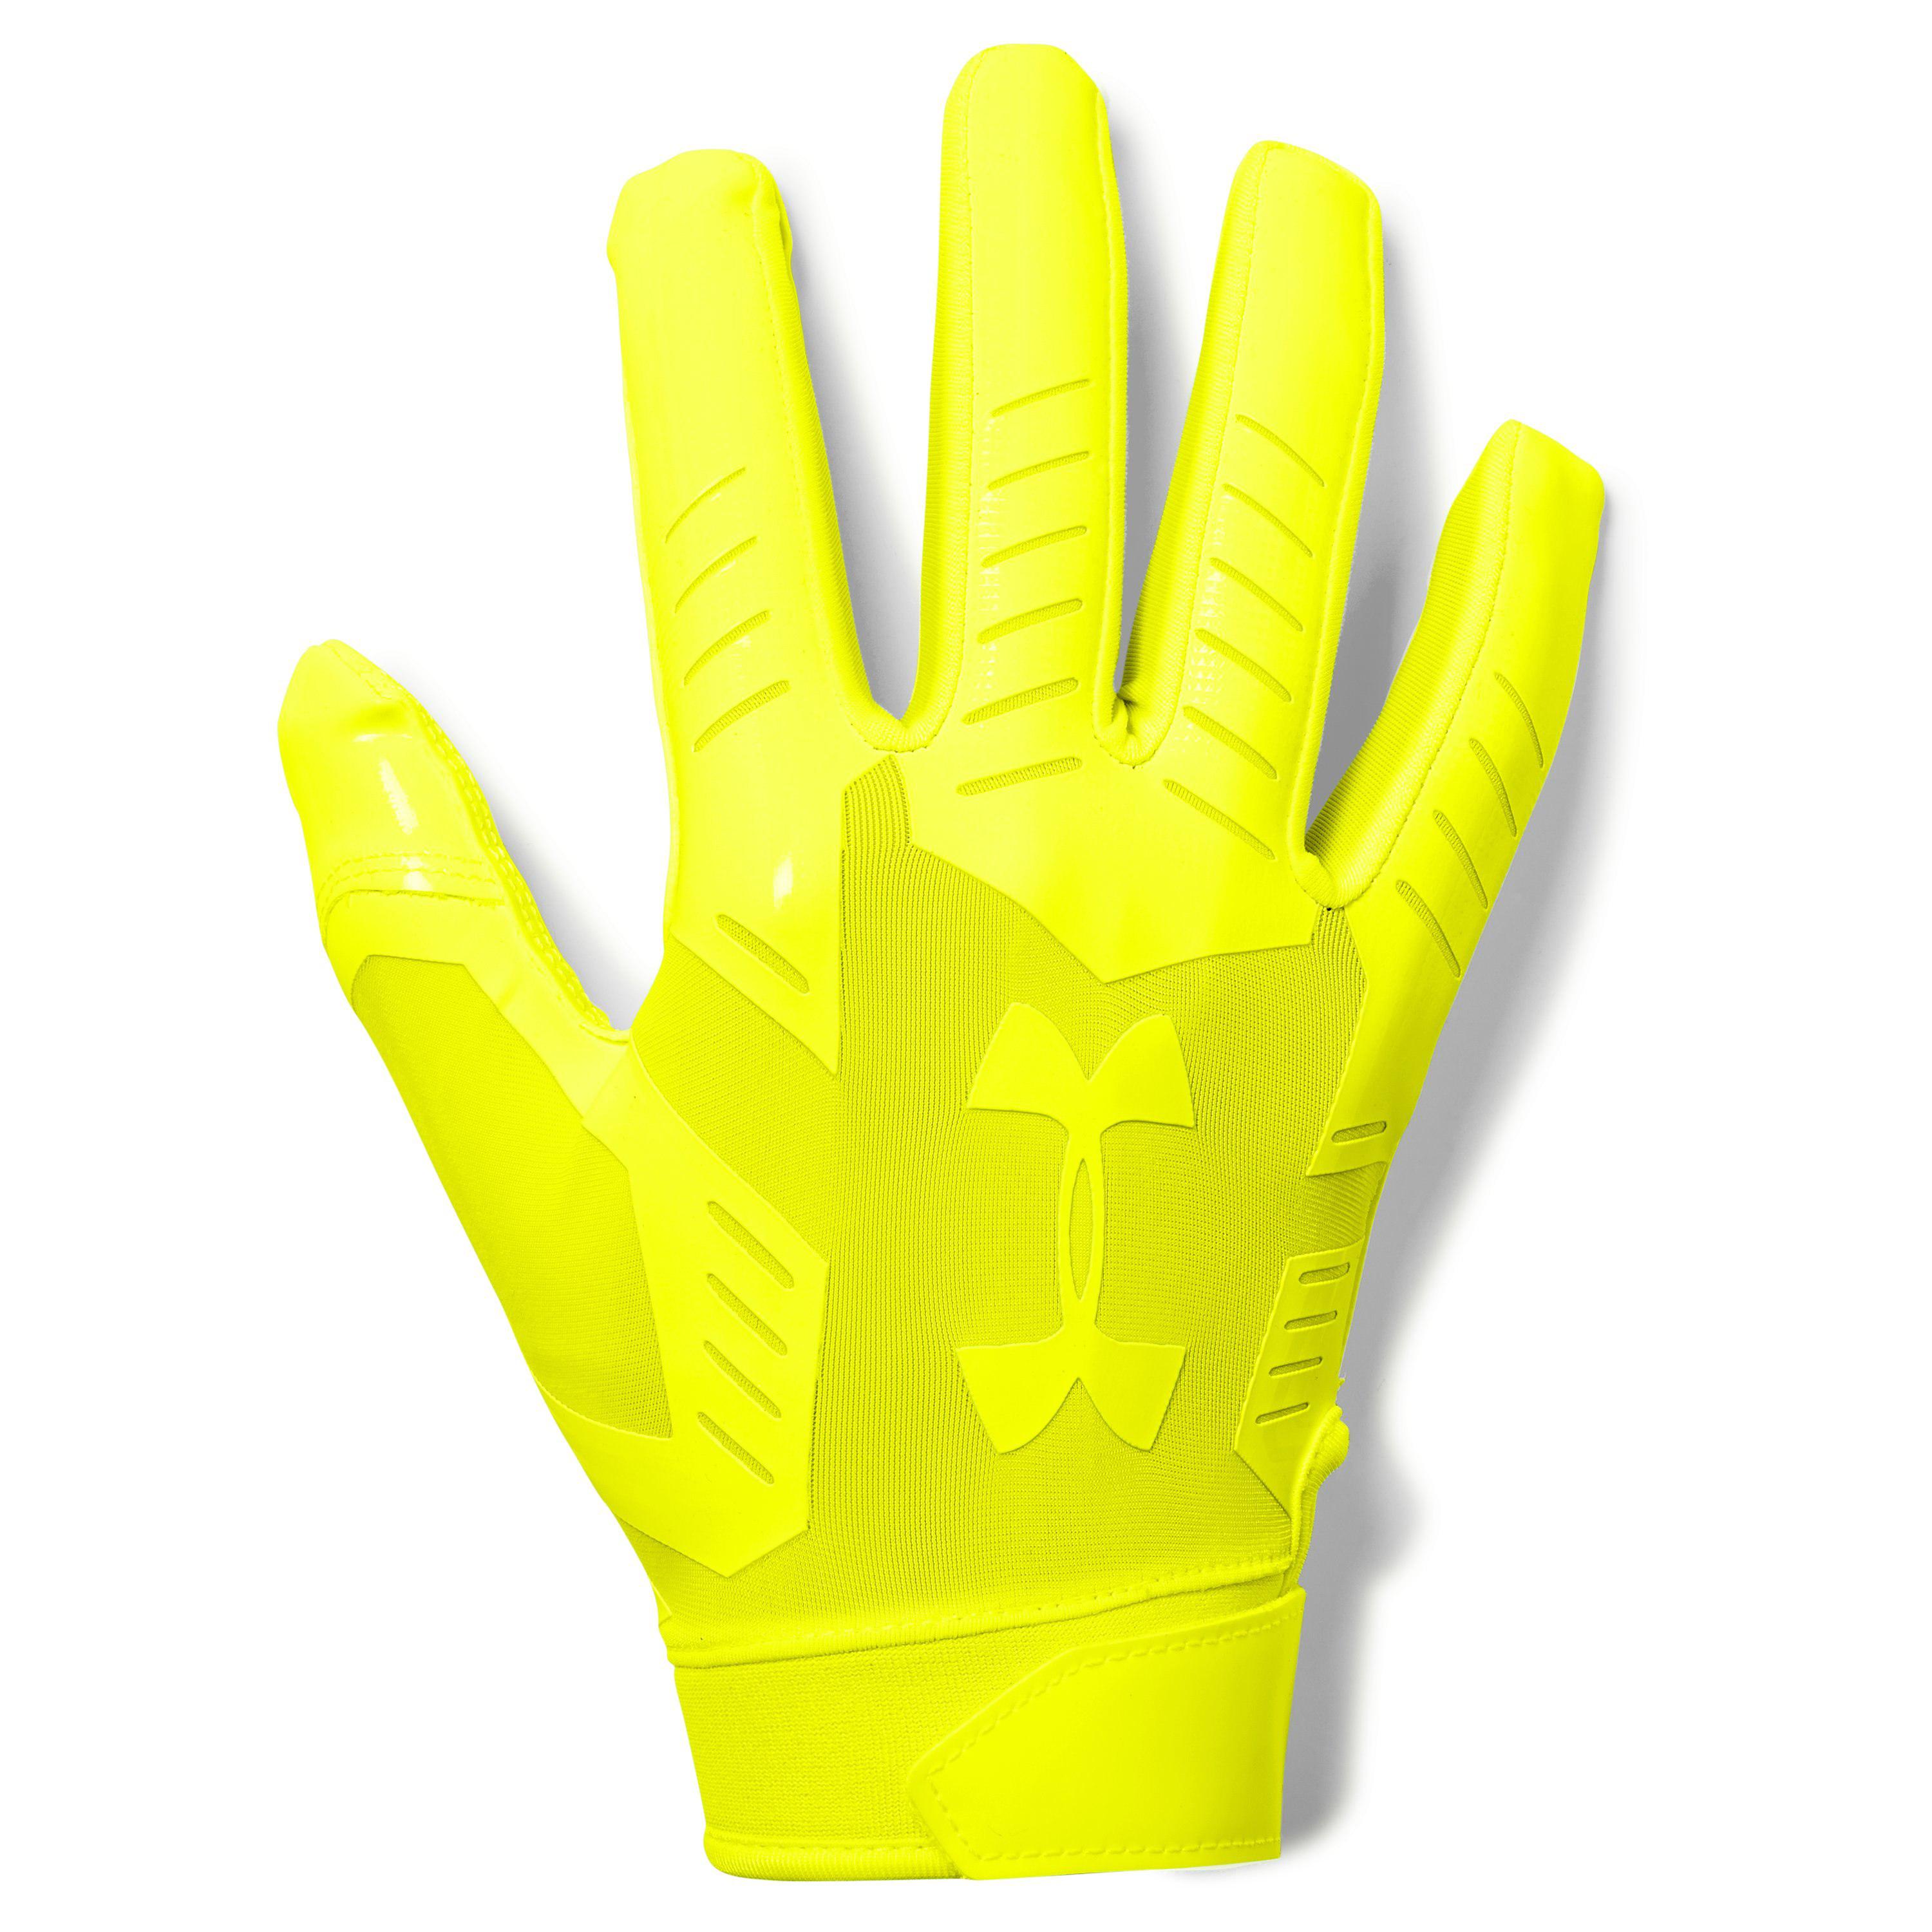 yellow under armour football gloves